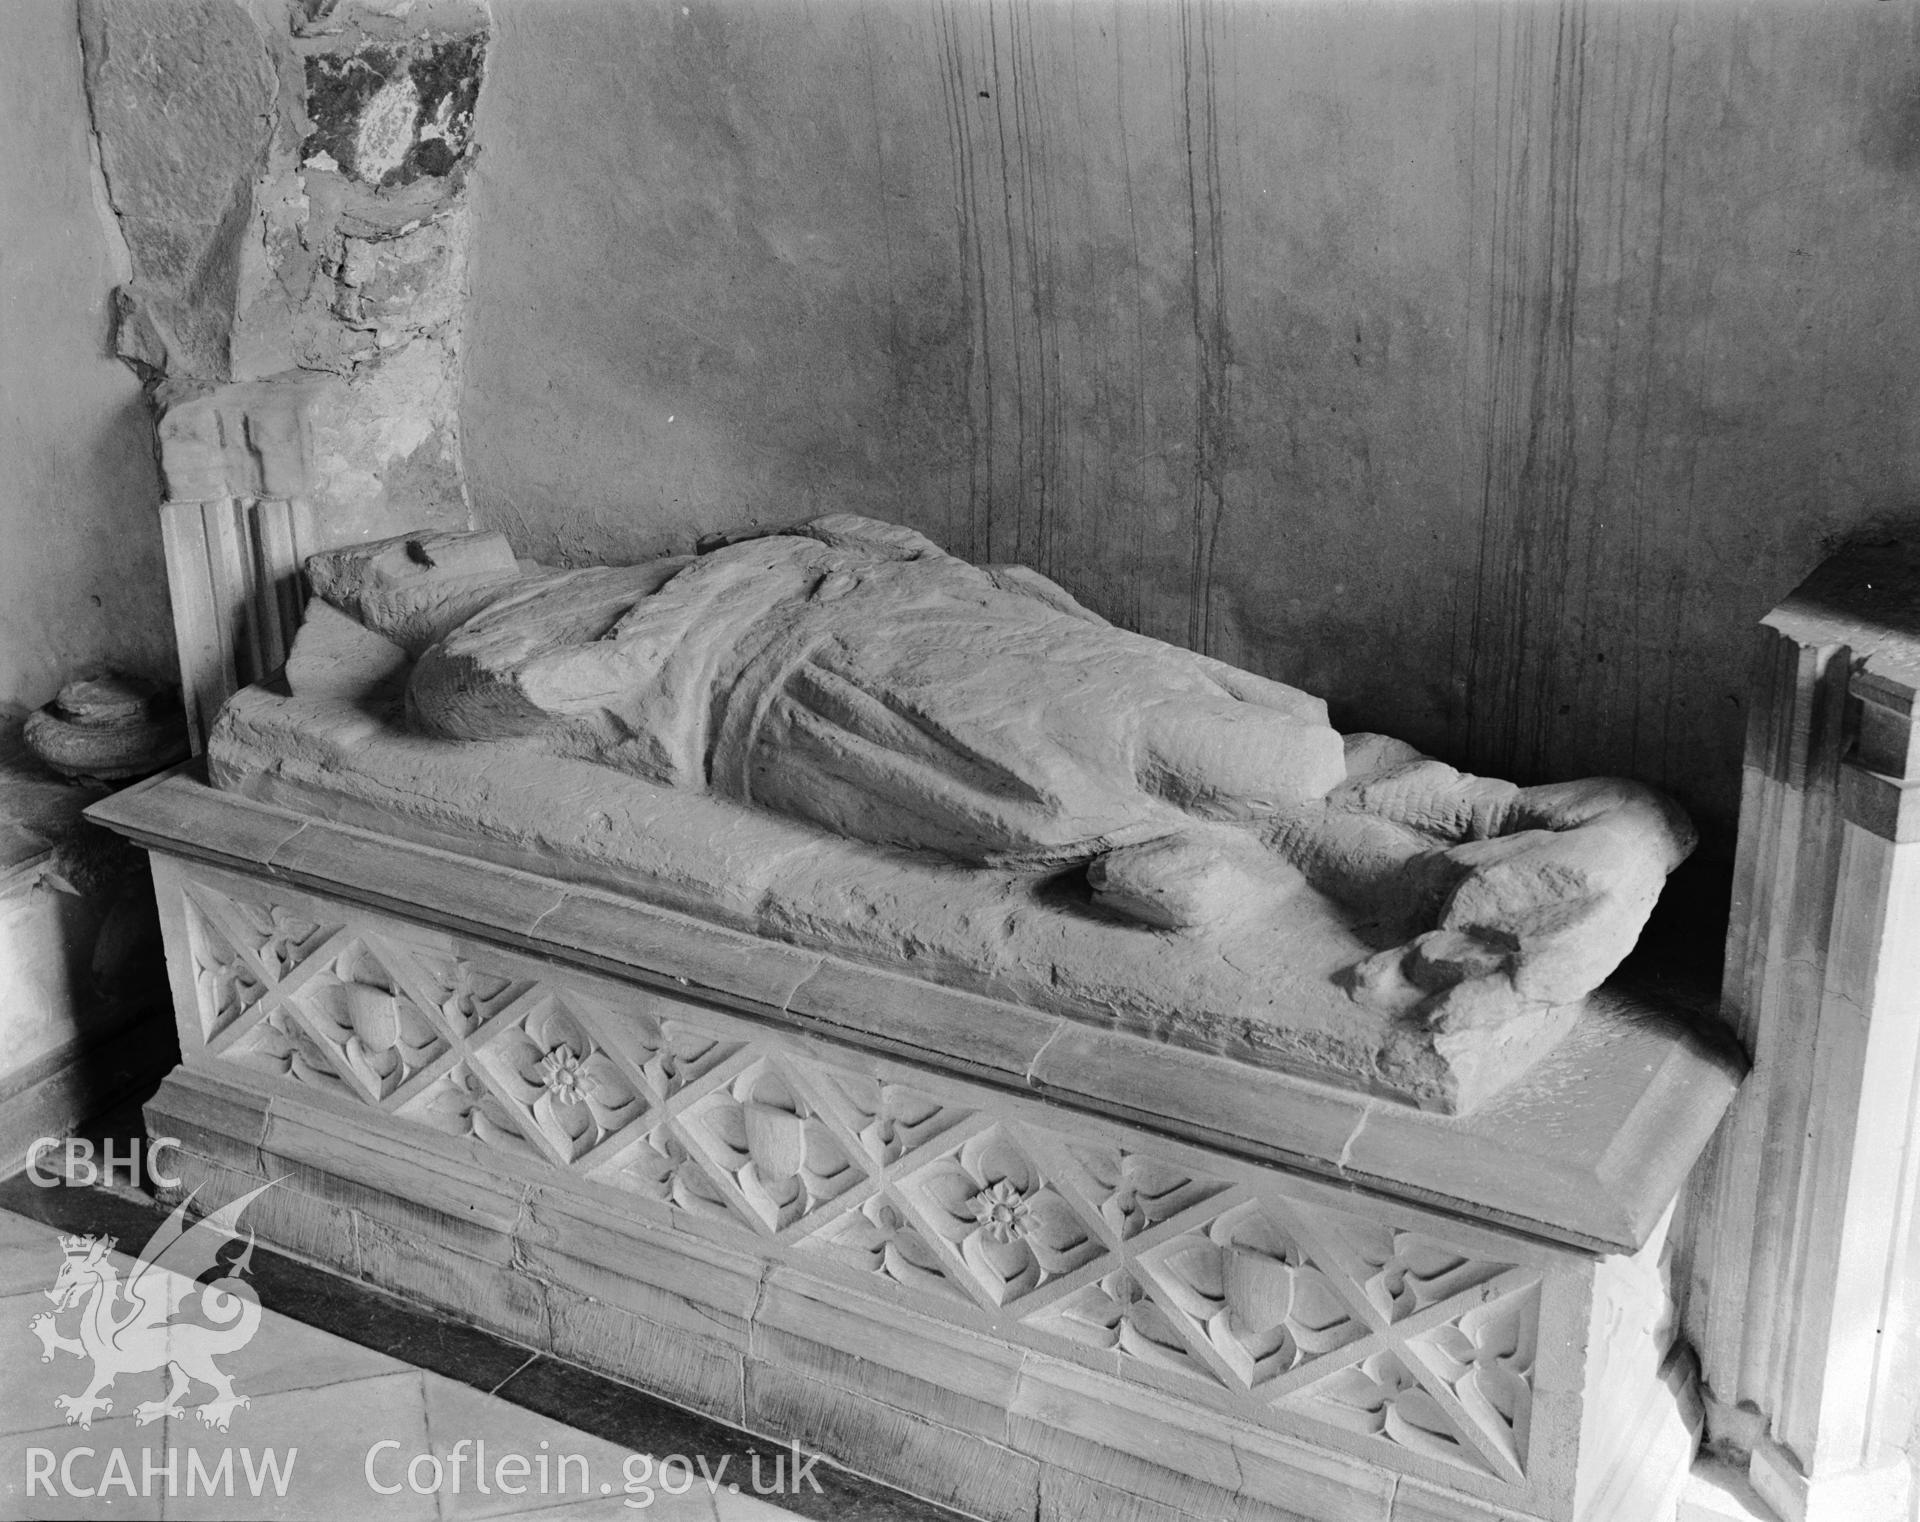 Interior view showing effigy in St Nicholas' Chapel.